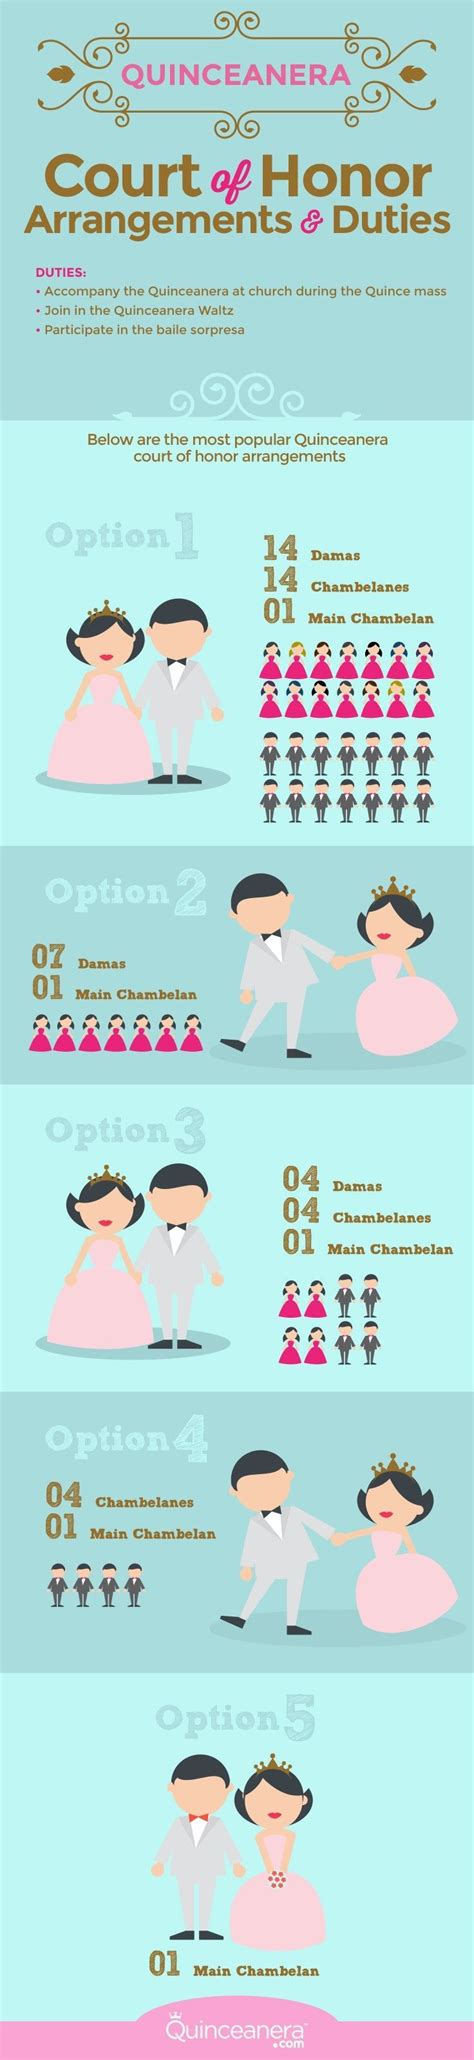 whats  quinceanera court  honor quinceanera court quinceanera planning quinceanera party